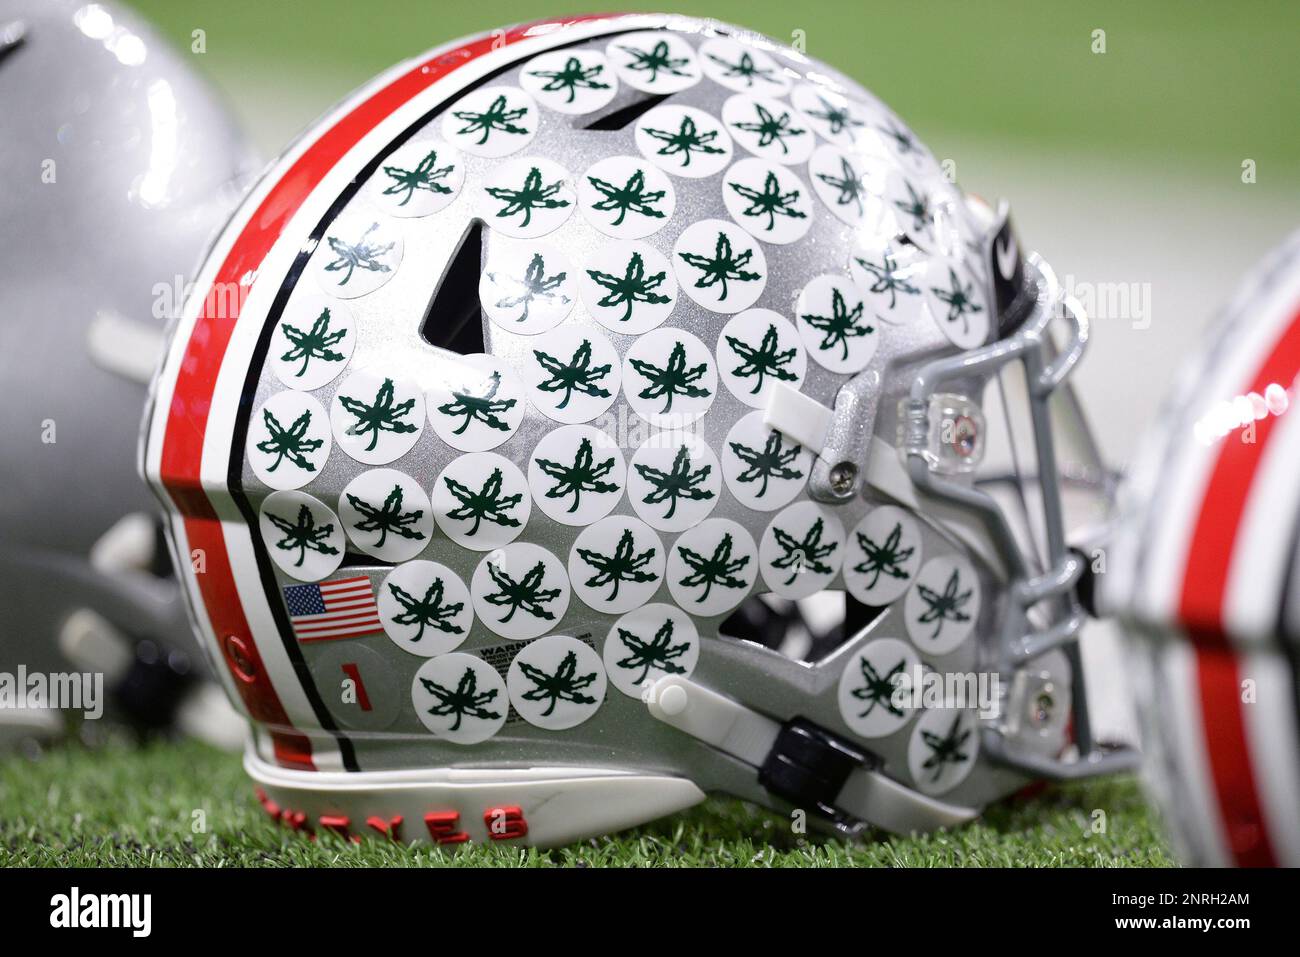 INDIANAPOLIS, IN - DECEMBER 07: The helmet of Ohio State Buckeyes  quarterback Justin Fields (1) is covered with Buckeye stickers during the  Big Ten Conference Championship football game between the Wisconsin Badgers